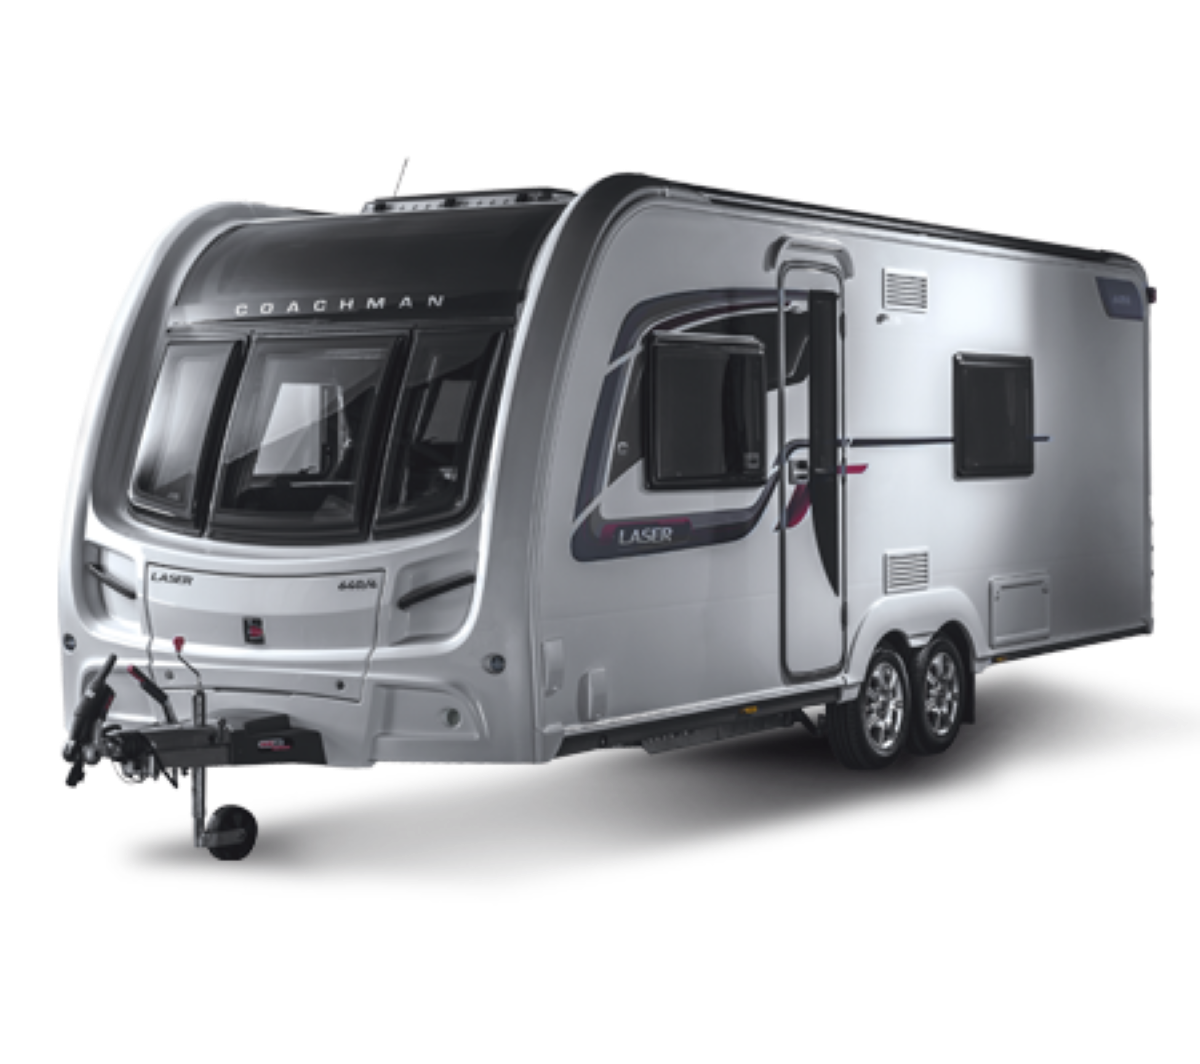 Coachman are heading into the Motorhome and Caravan with a lot of offers and attractions